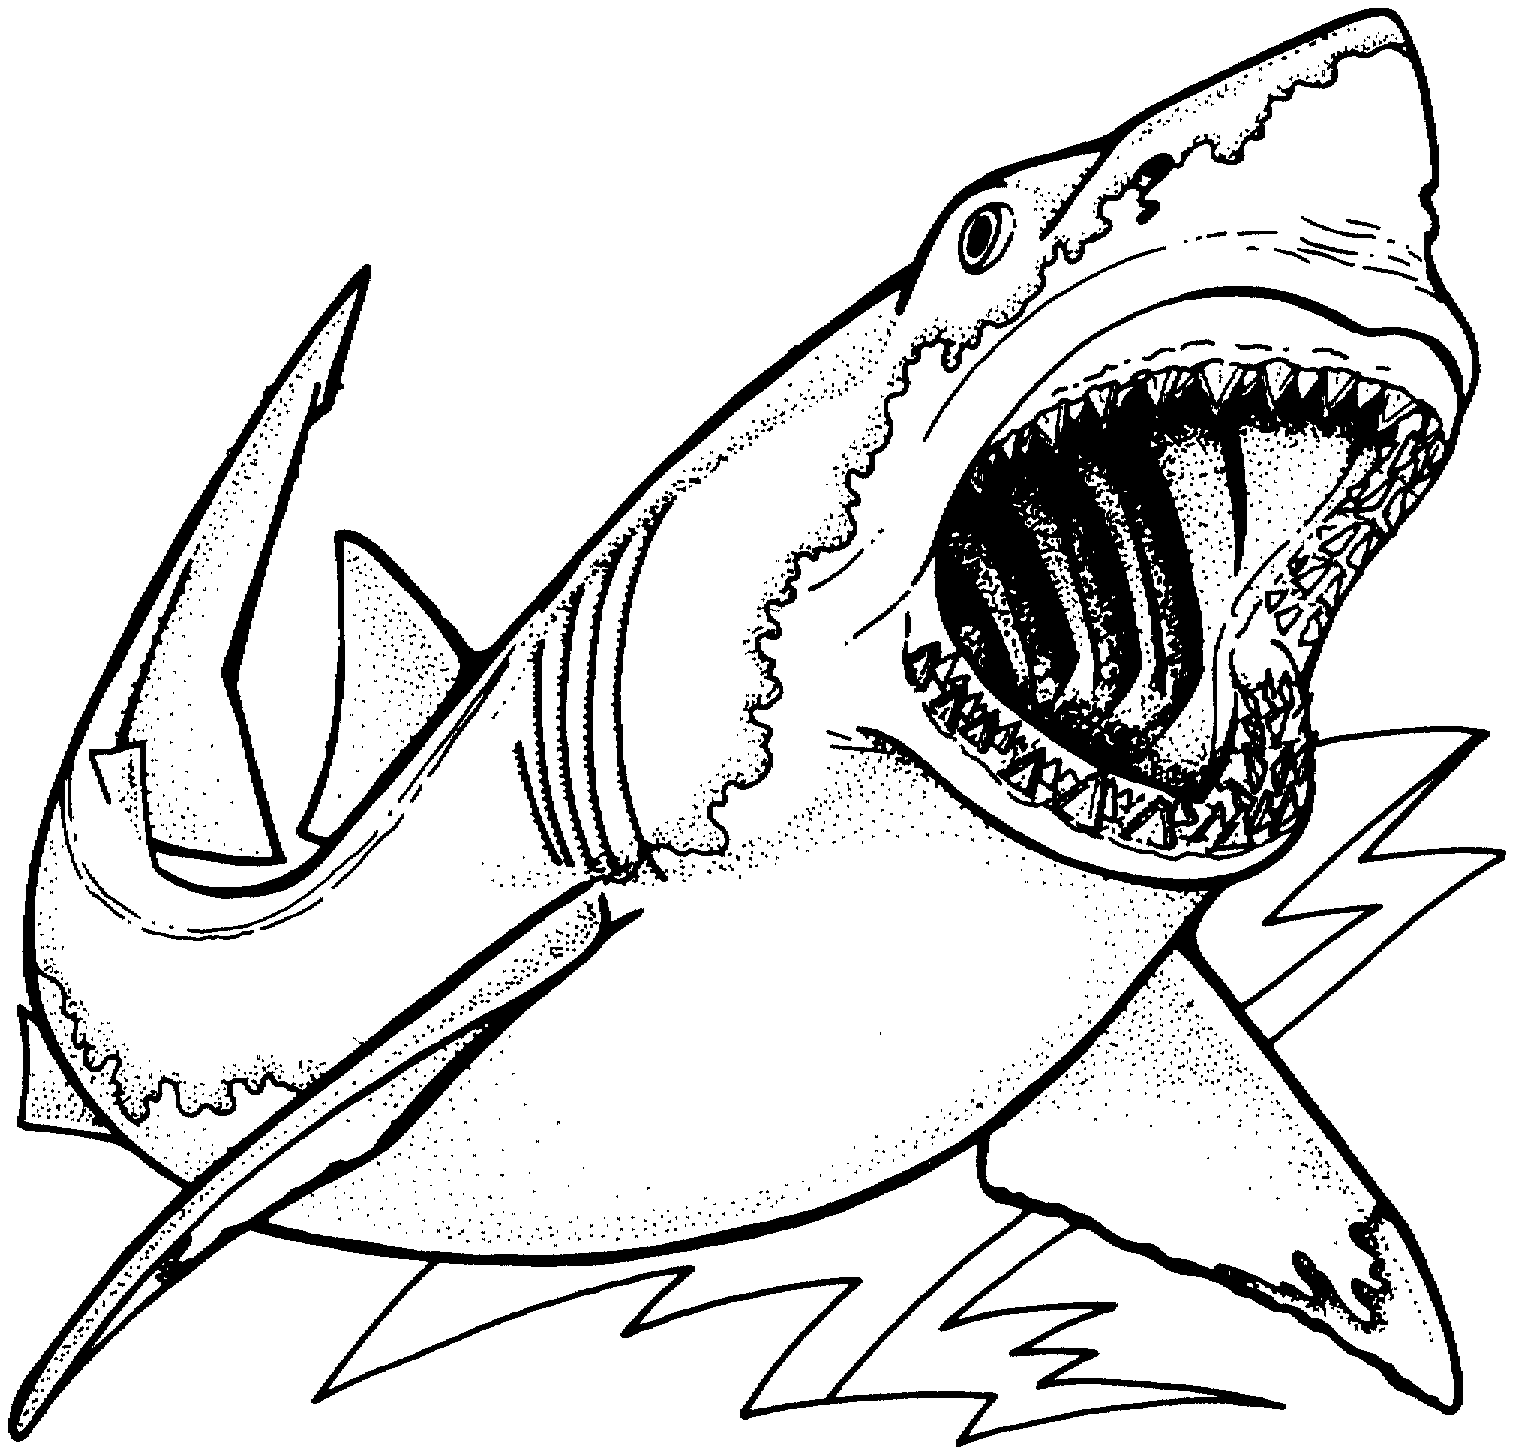 shark pictures for kids to color free shark coloring pages kids for pictures shark to color 